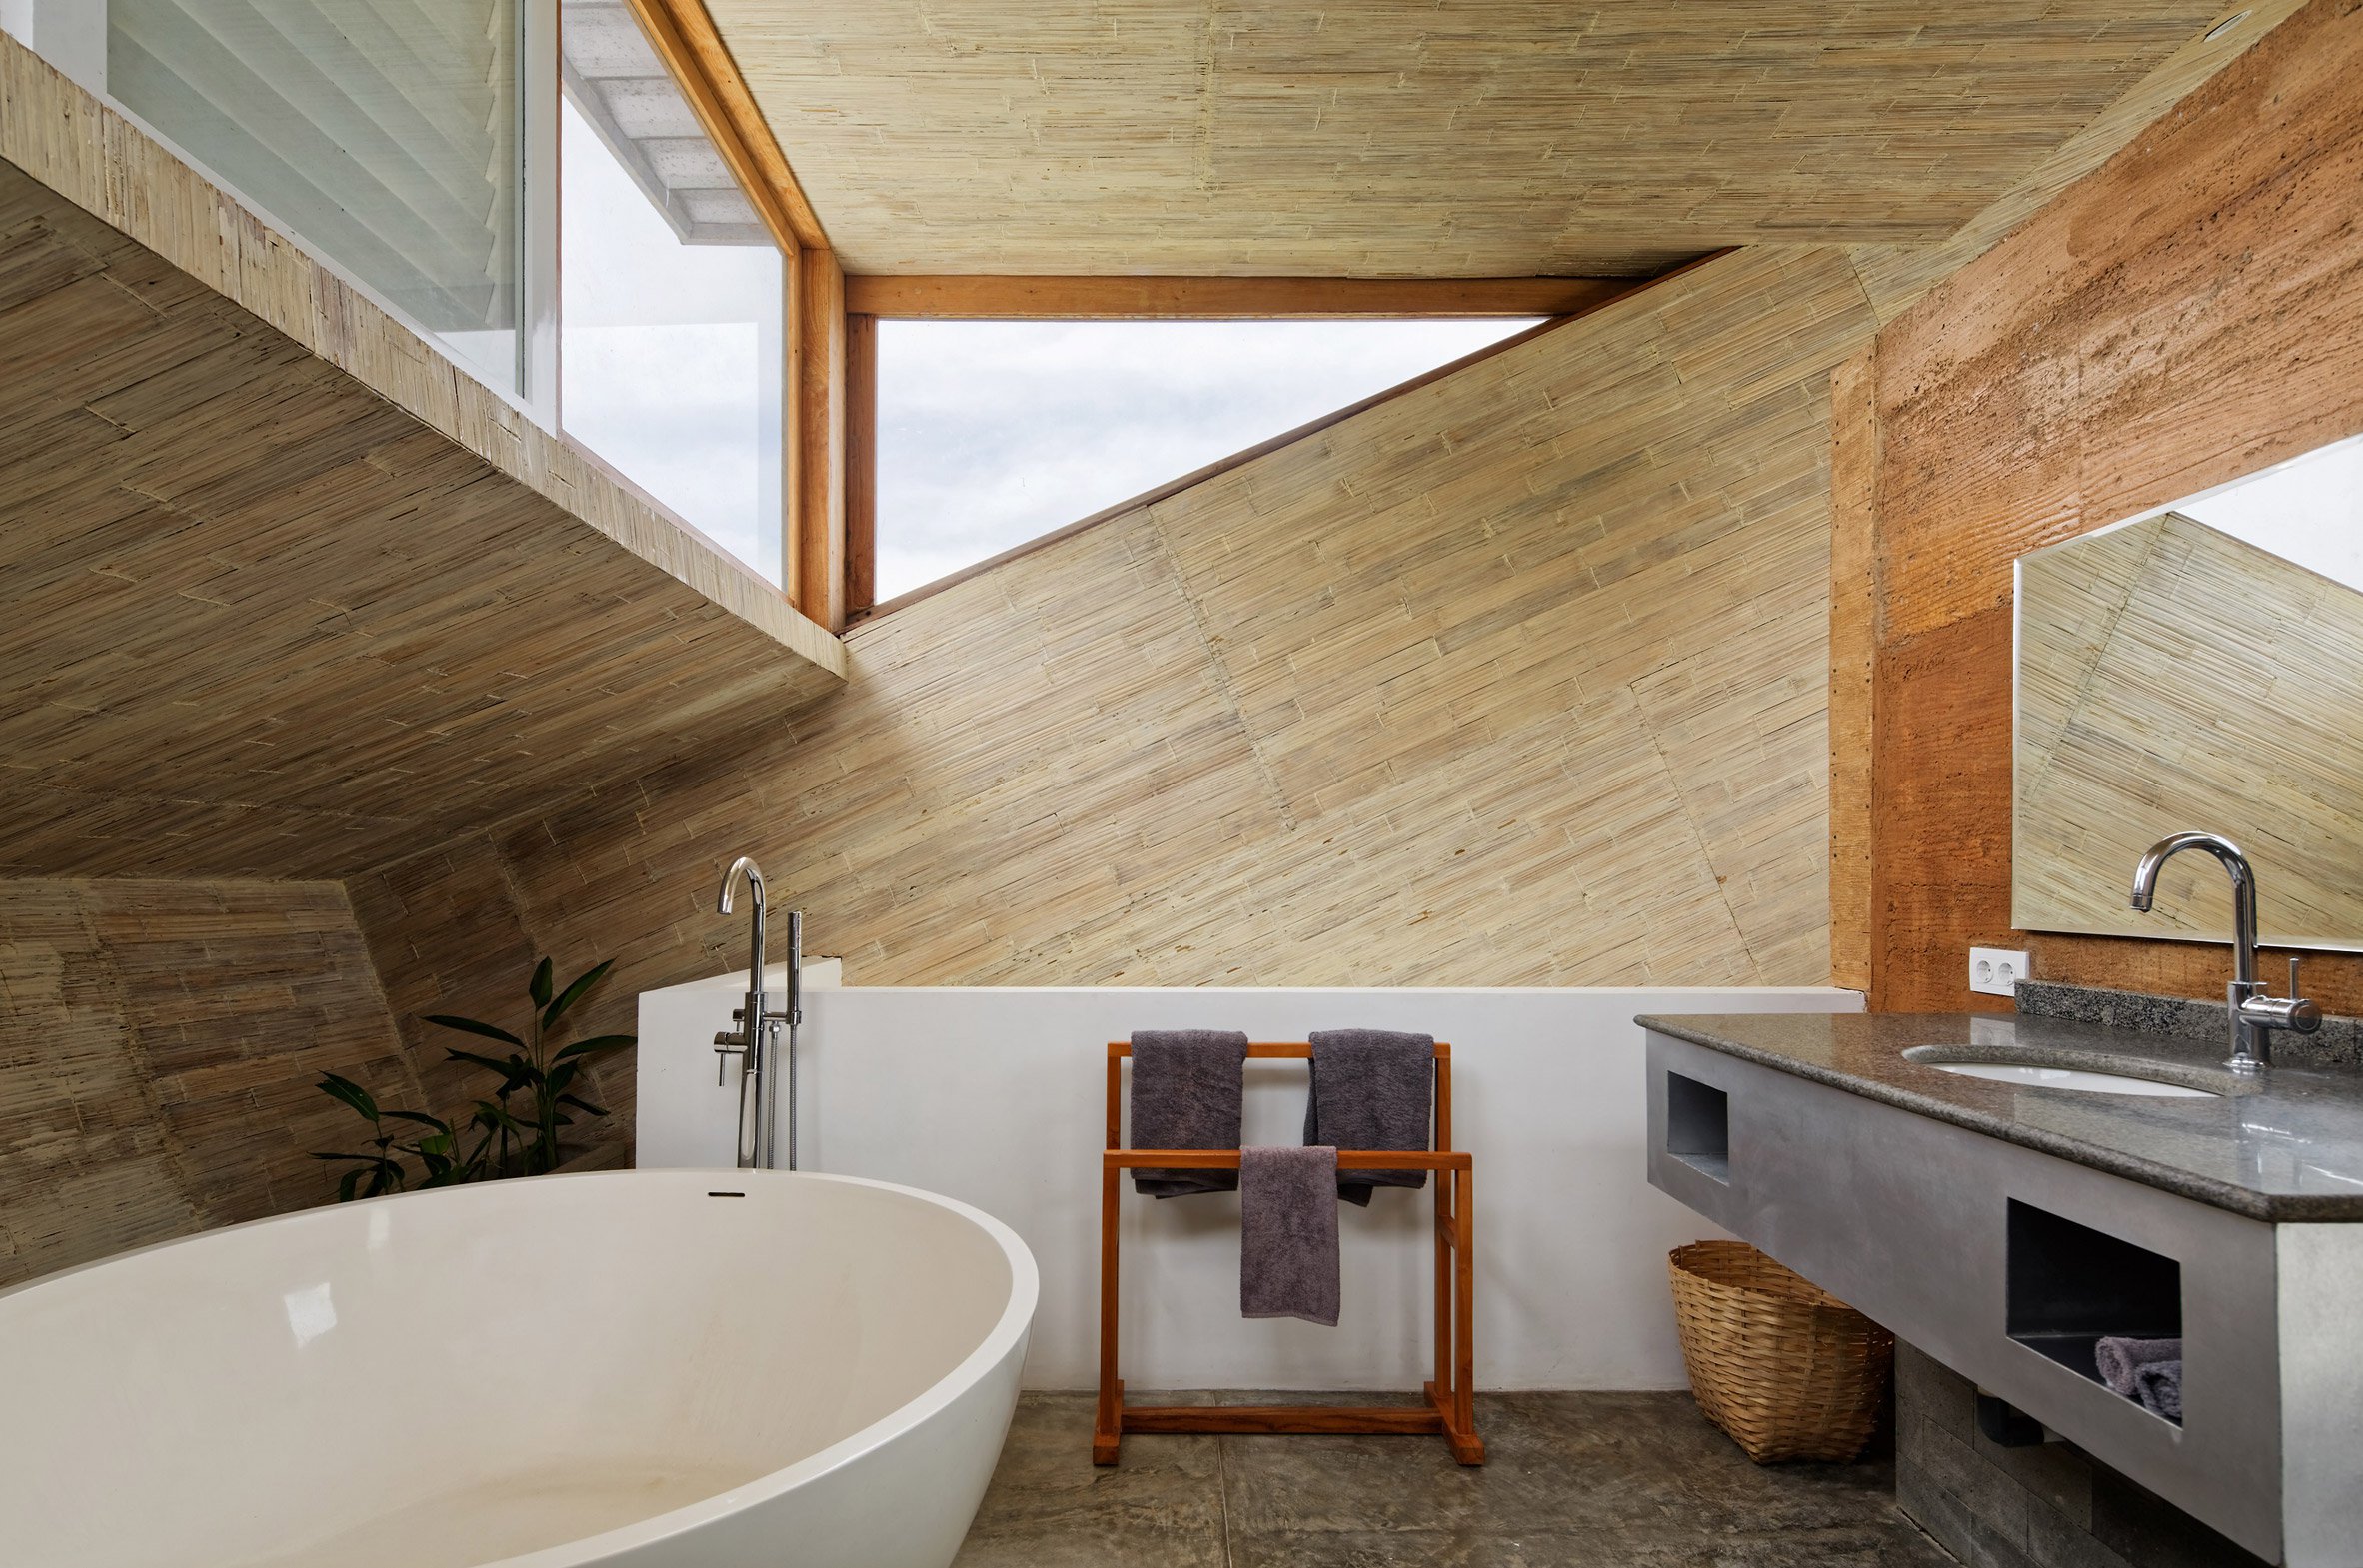 The en-suite bathroom features some windows, too, and there's a free-standing bathtub, a concrete vanity and much wood in the decor